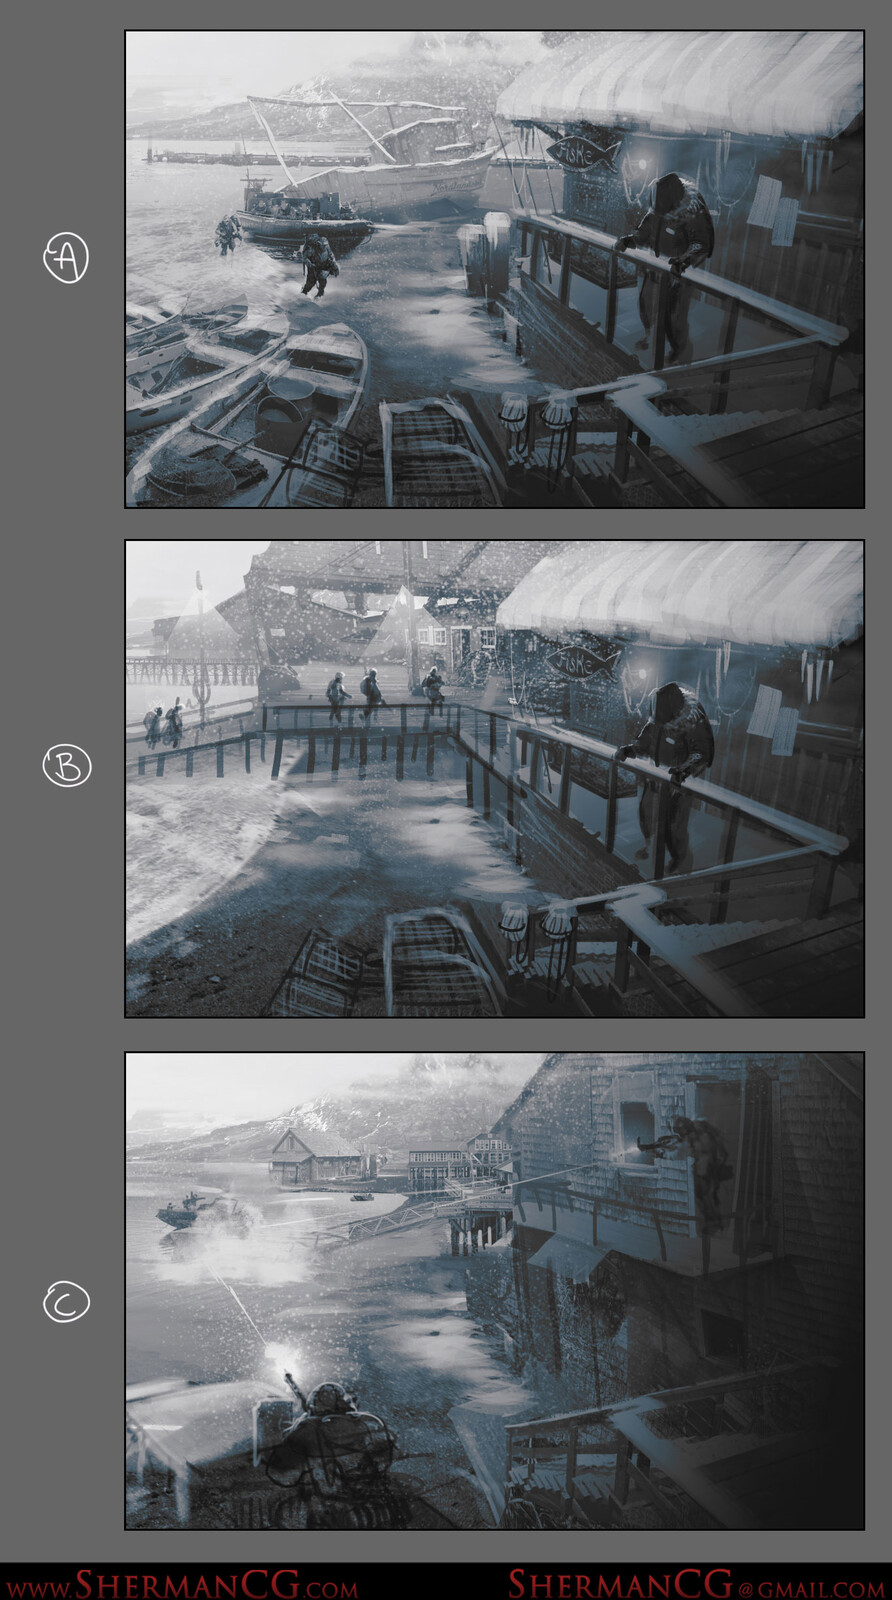 Early thumbnail exploration, mostly used for discussion on what the concept task asks for